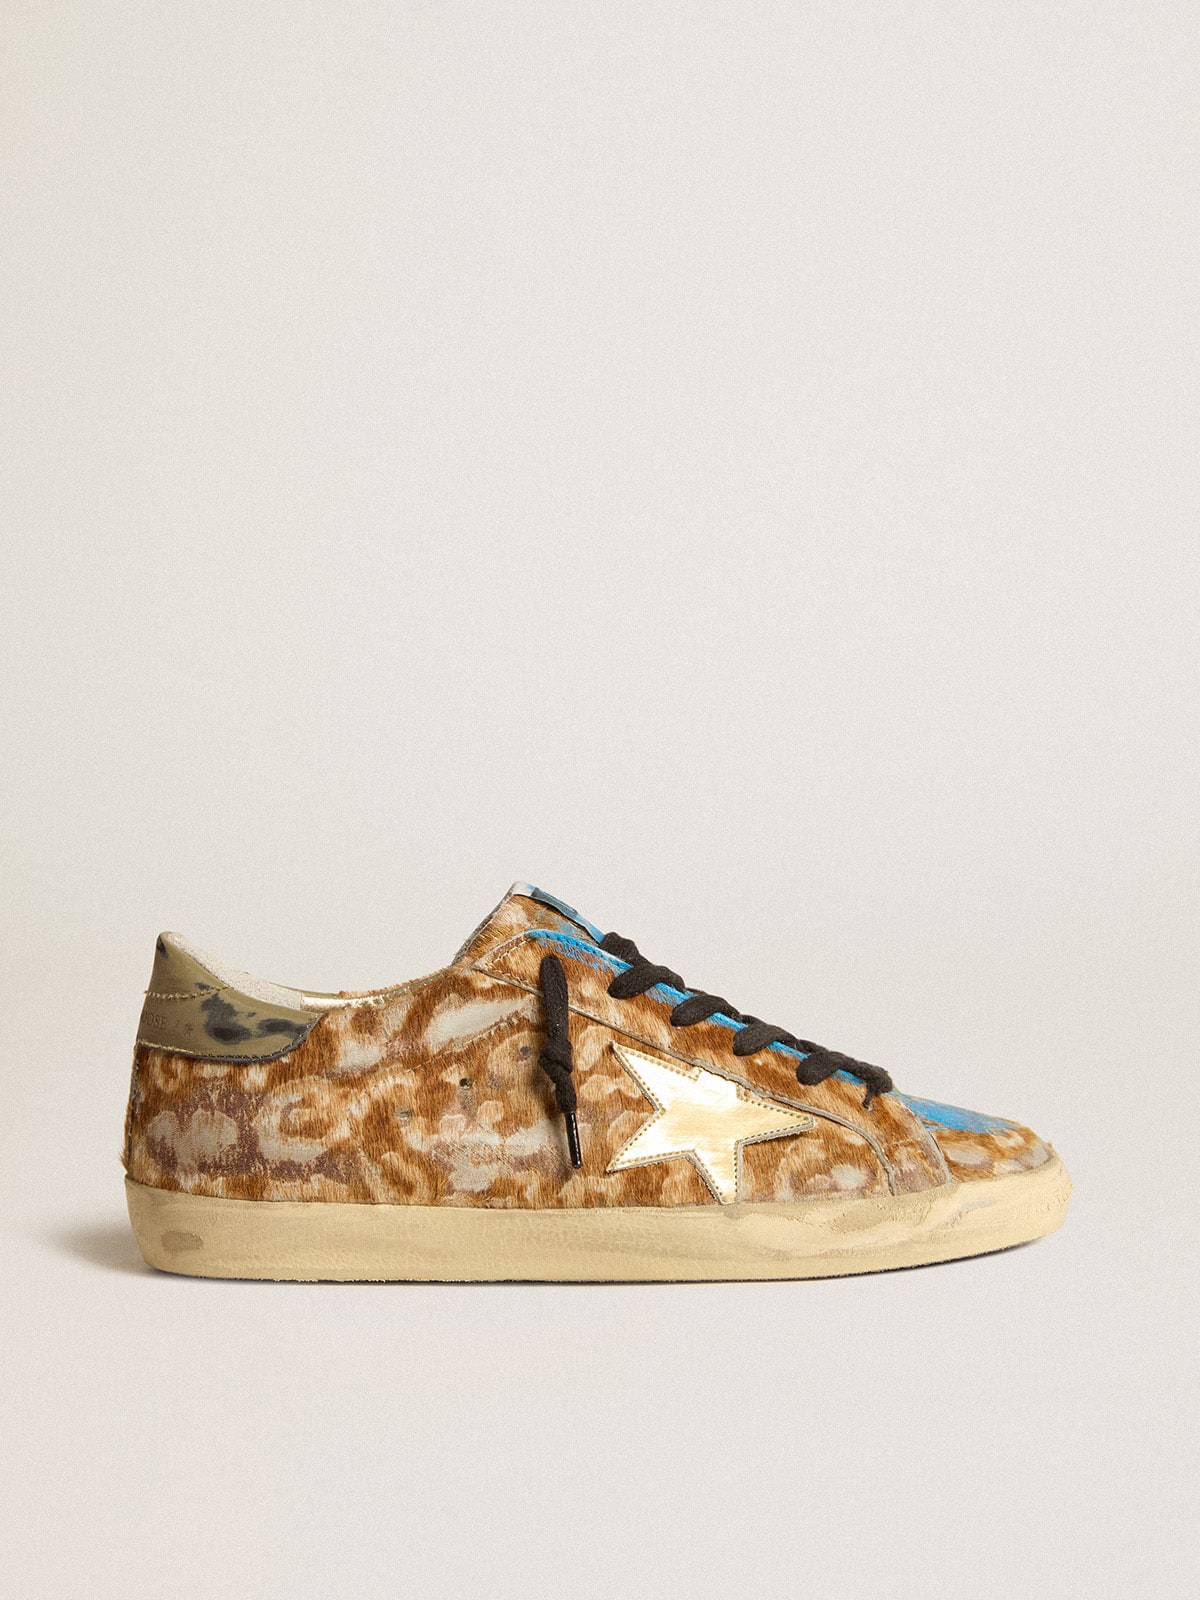 Men’s Super-Star LAB in leopard pony skin with gold star and gray heel tab